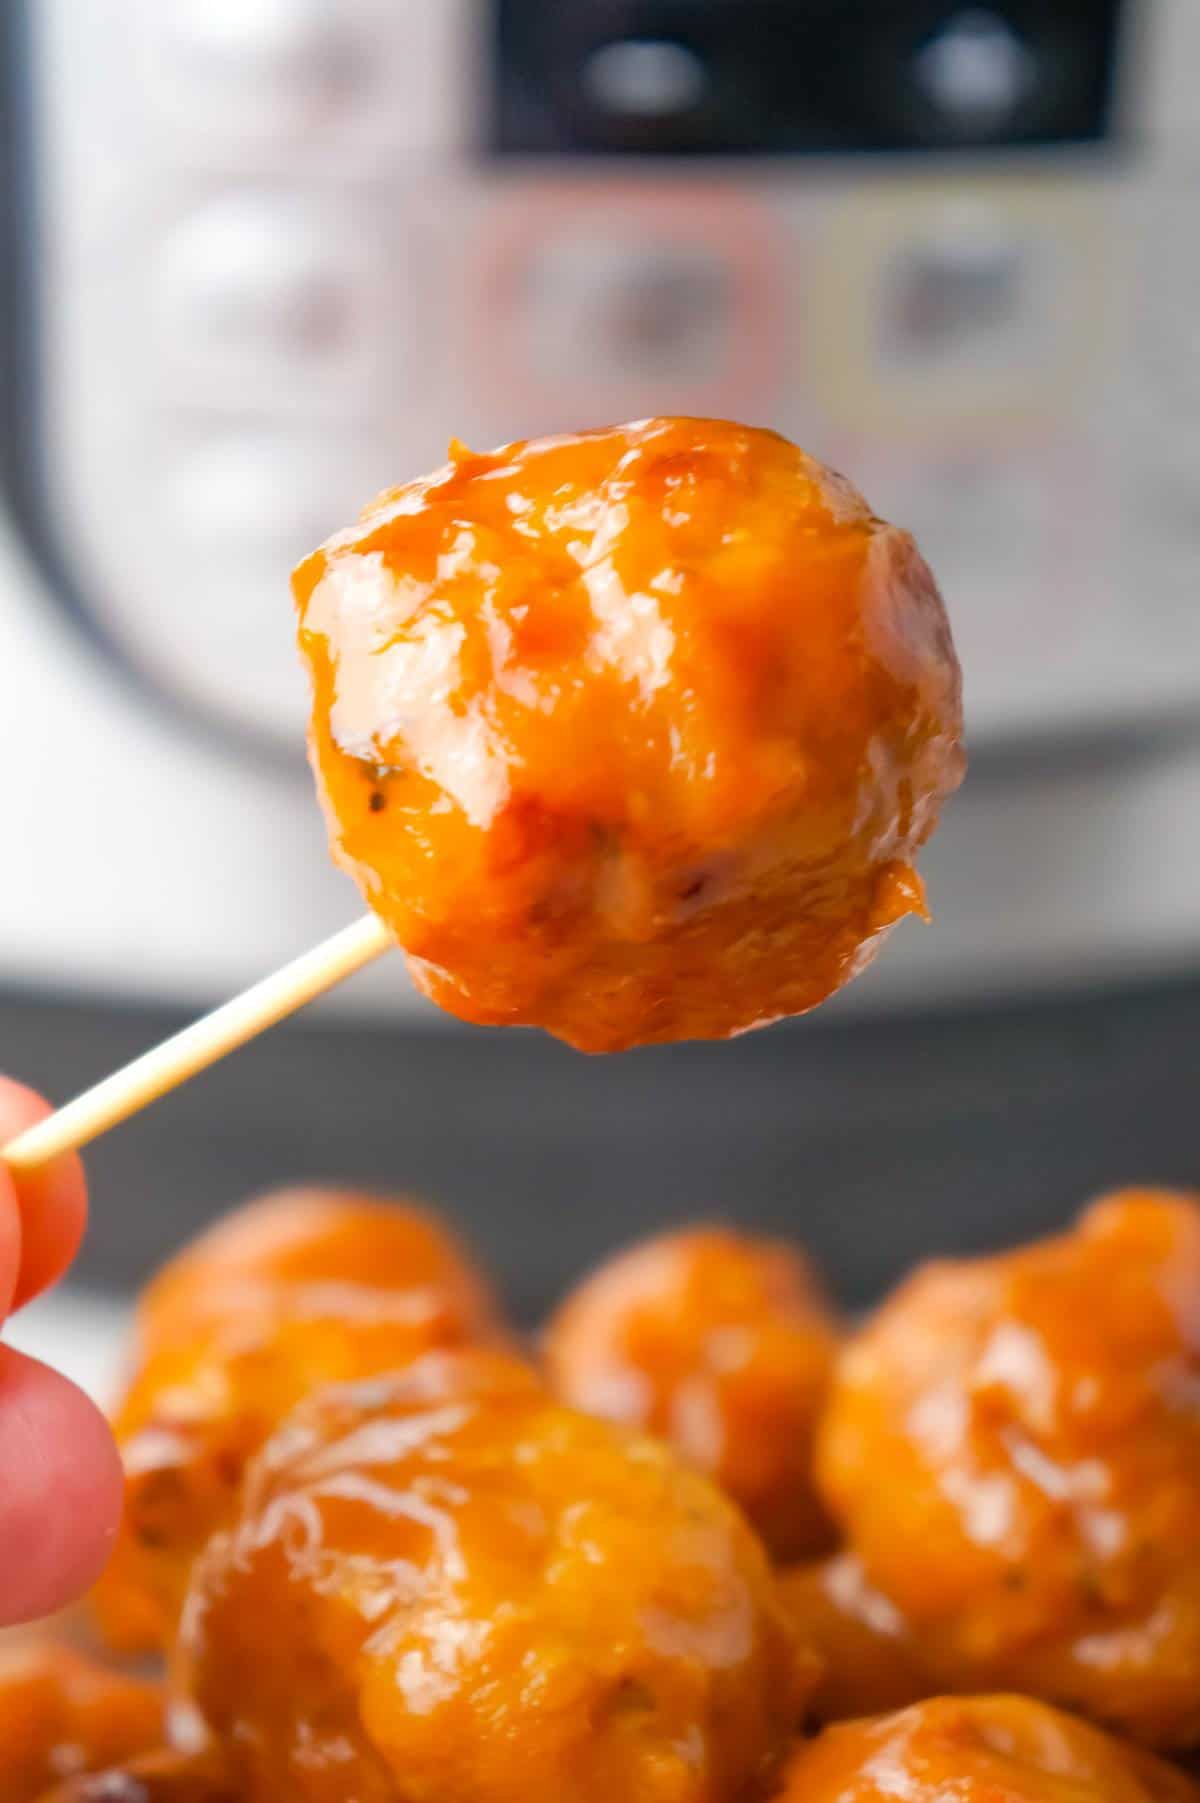 Instant Pot Cranberry Mustard Turkey Meatballs are a delicious party food recipe made with frozen turkey meatballs, jellied cranberry sauce, yellow mustard and liquid honey.